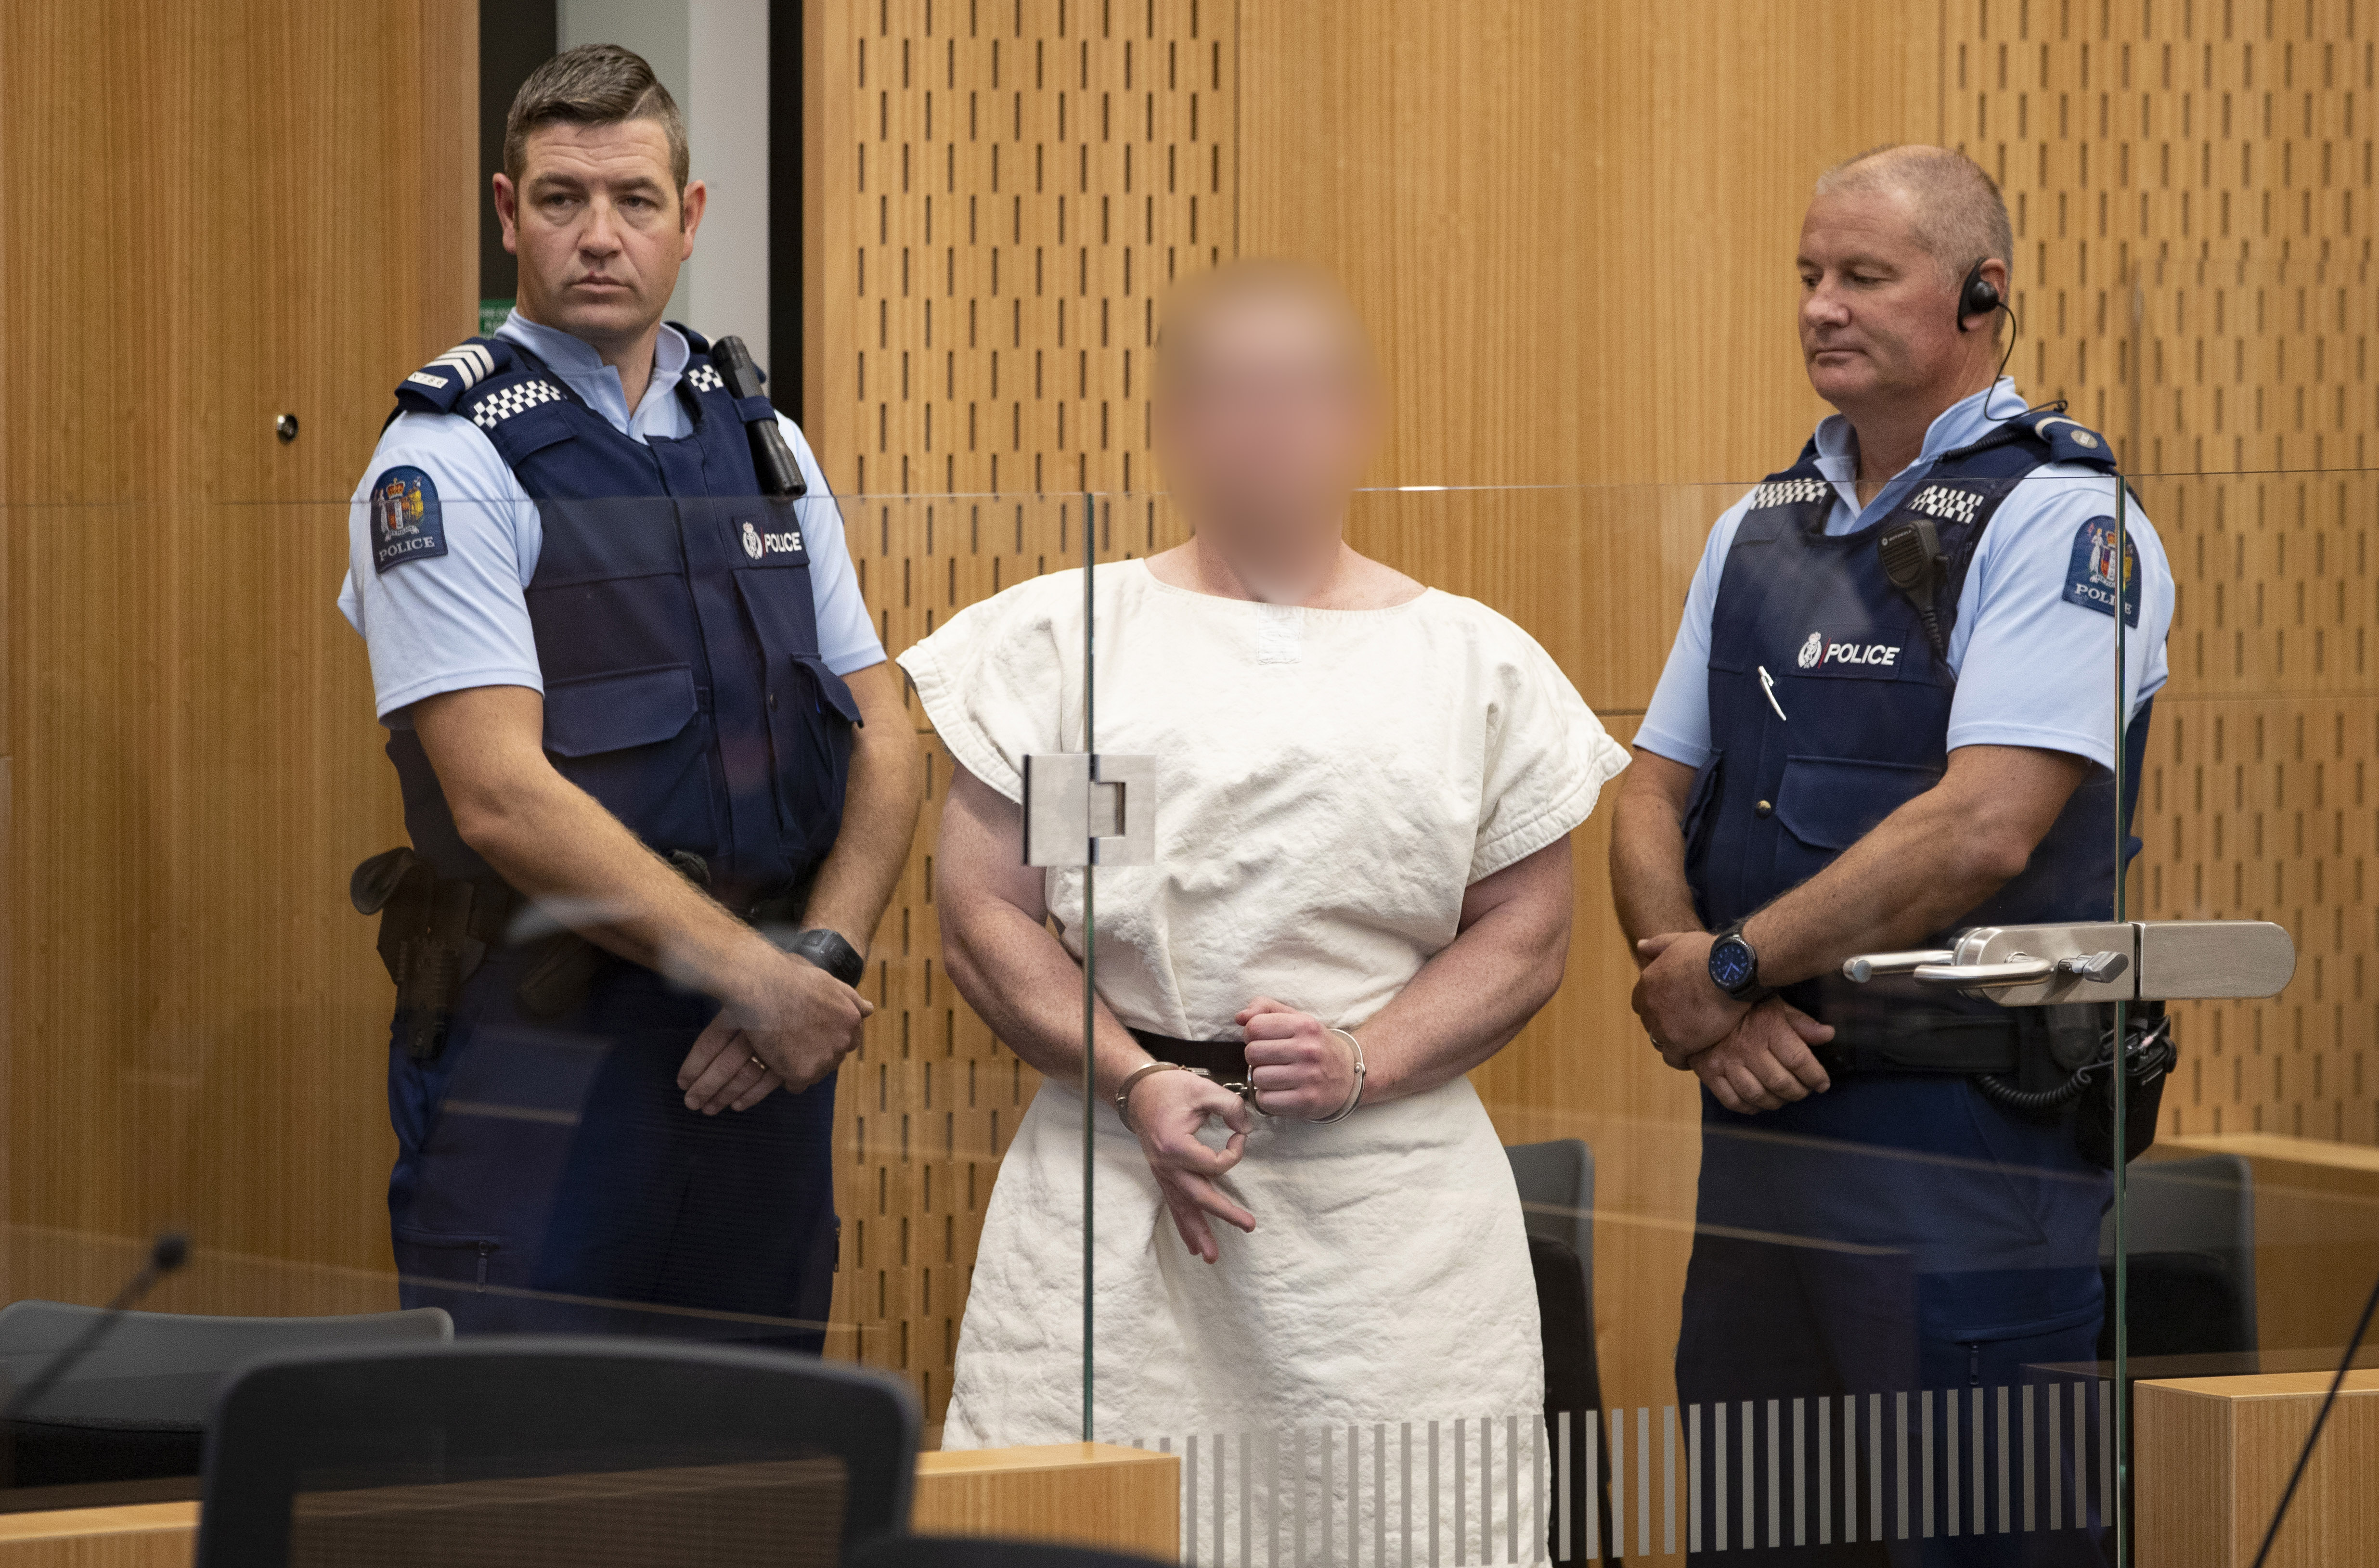 The man charged in relation to the Christchurch massacre in the dock